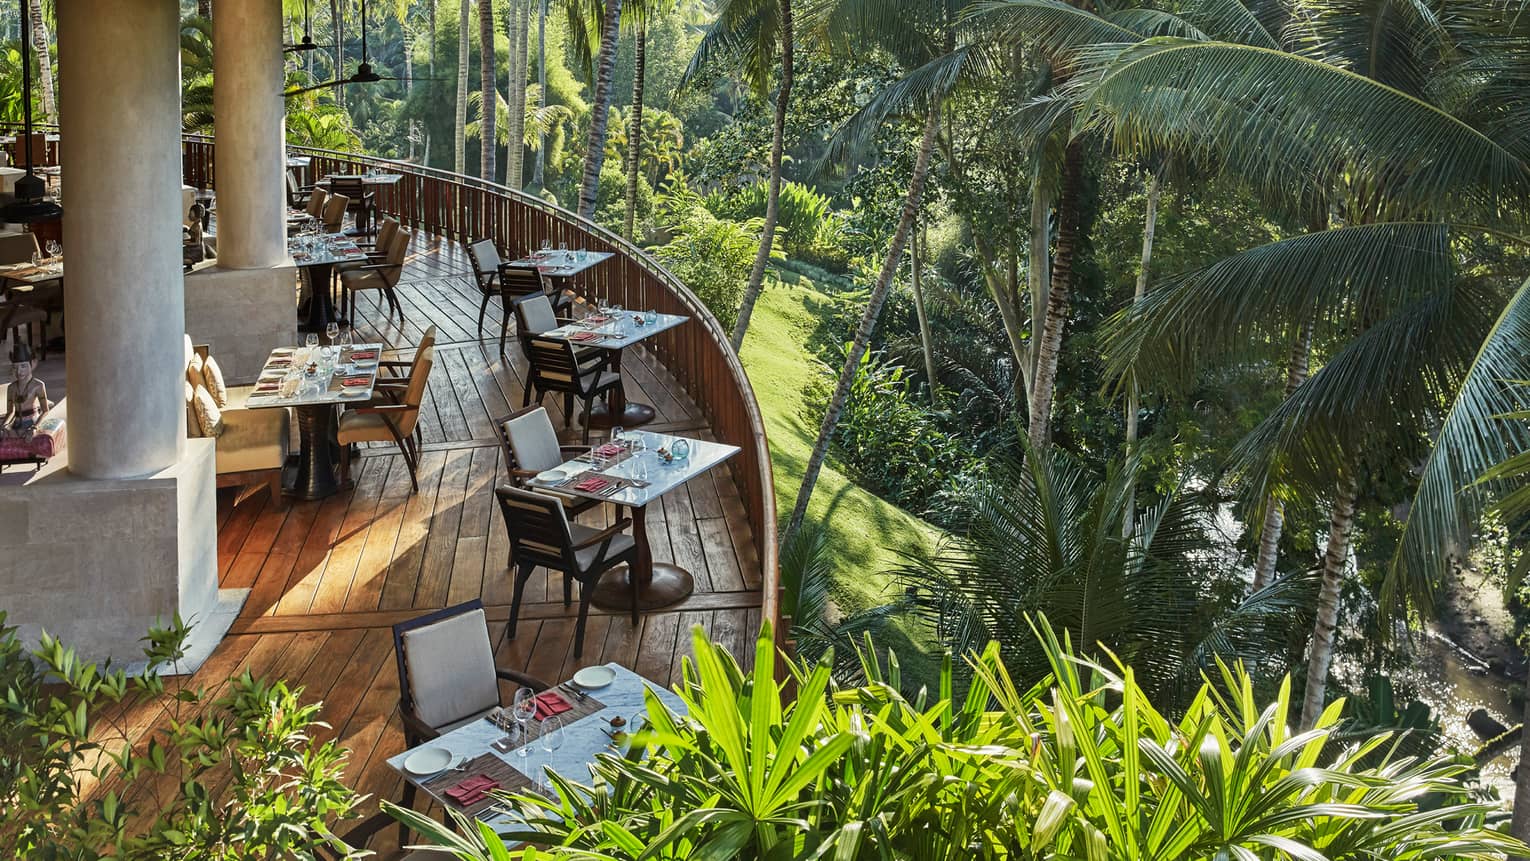 Looking down at curved wood patio of Ayung Terrace outdoor dining room, tables and chairs overlooking palm trees, forest